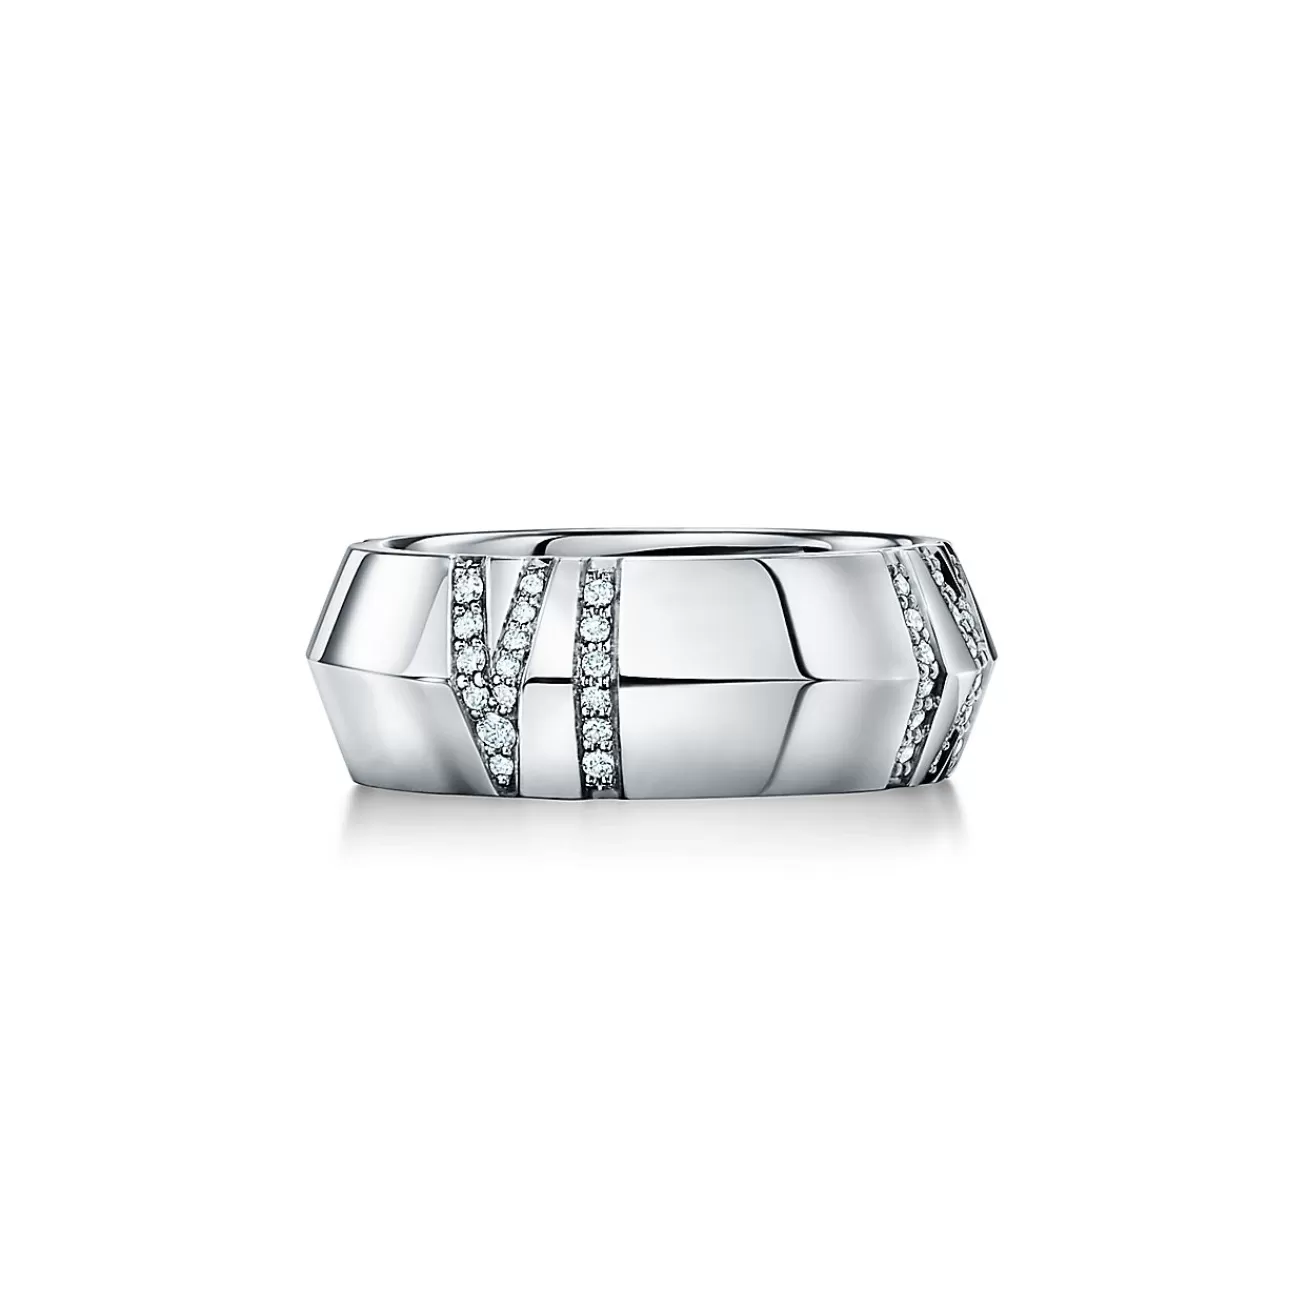 Tiffany & Co. Atlas® X Closed Wide Ring in White Gold with Diamonds, 7.5 mm Wide | ^ Rings | Men's Jewelry